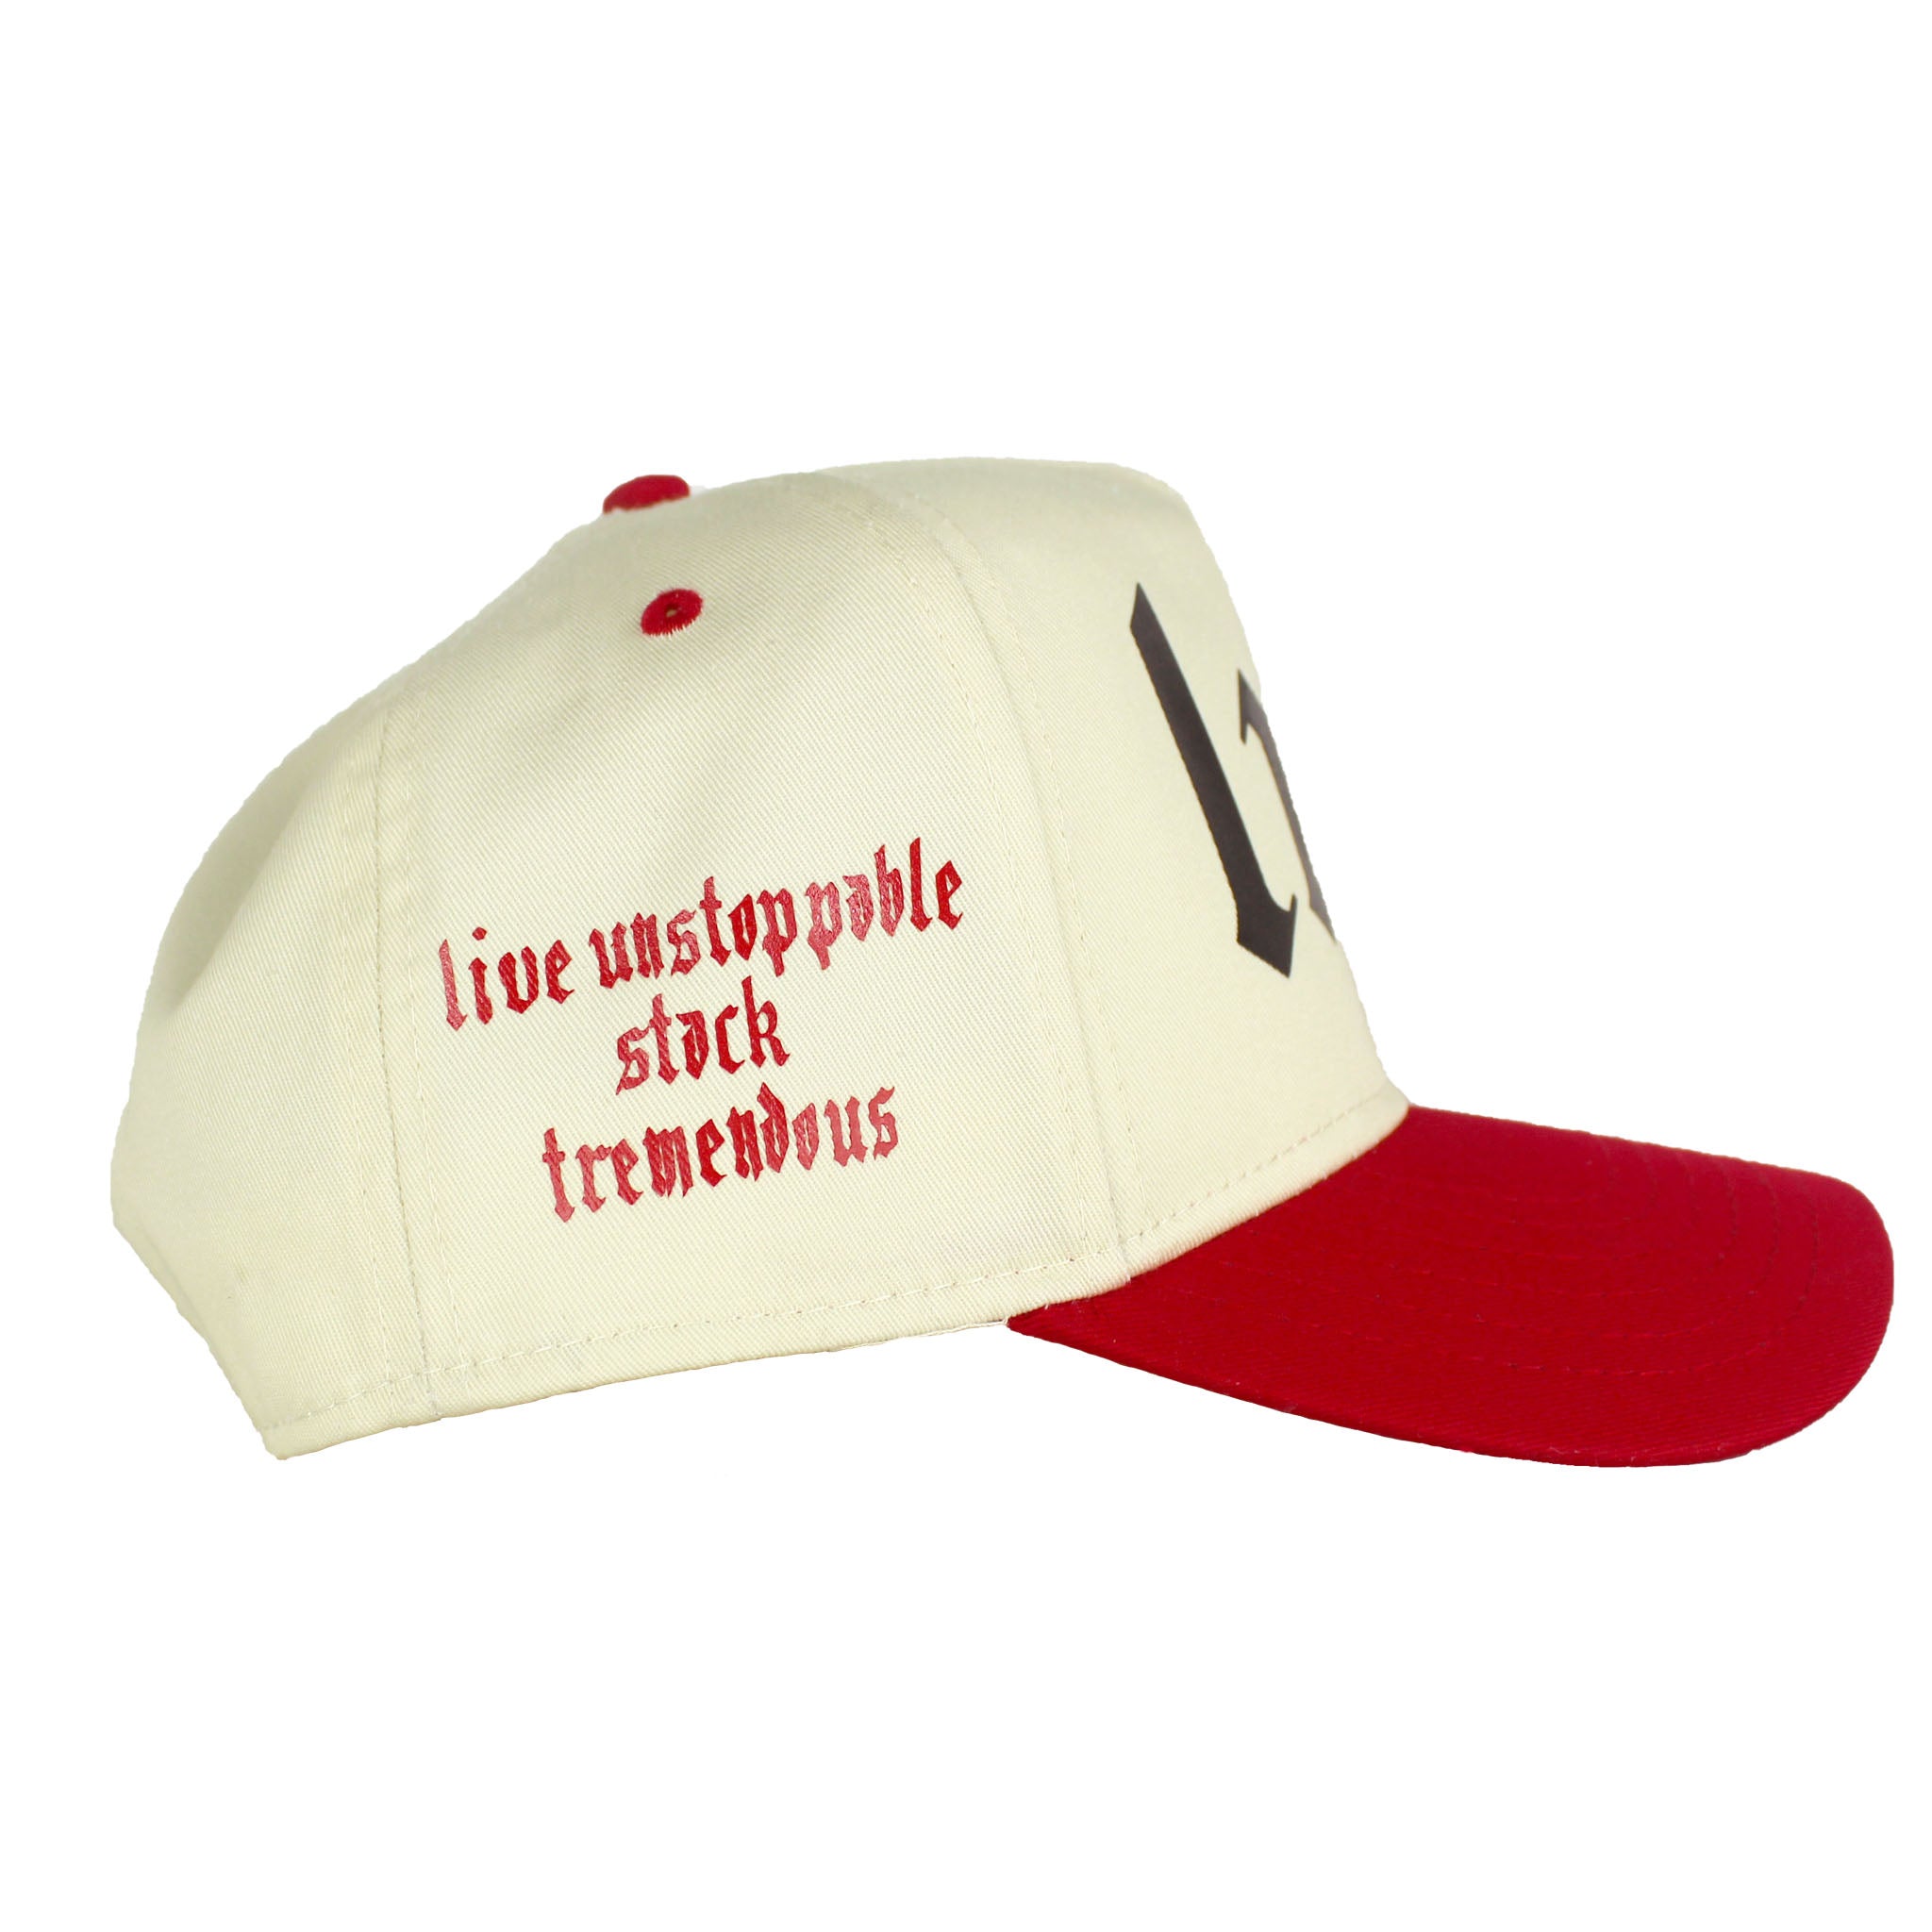 Red trucker hat. Red and White hat. Mens red hat. Snapback hat. - Neet Freak Clothing